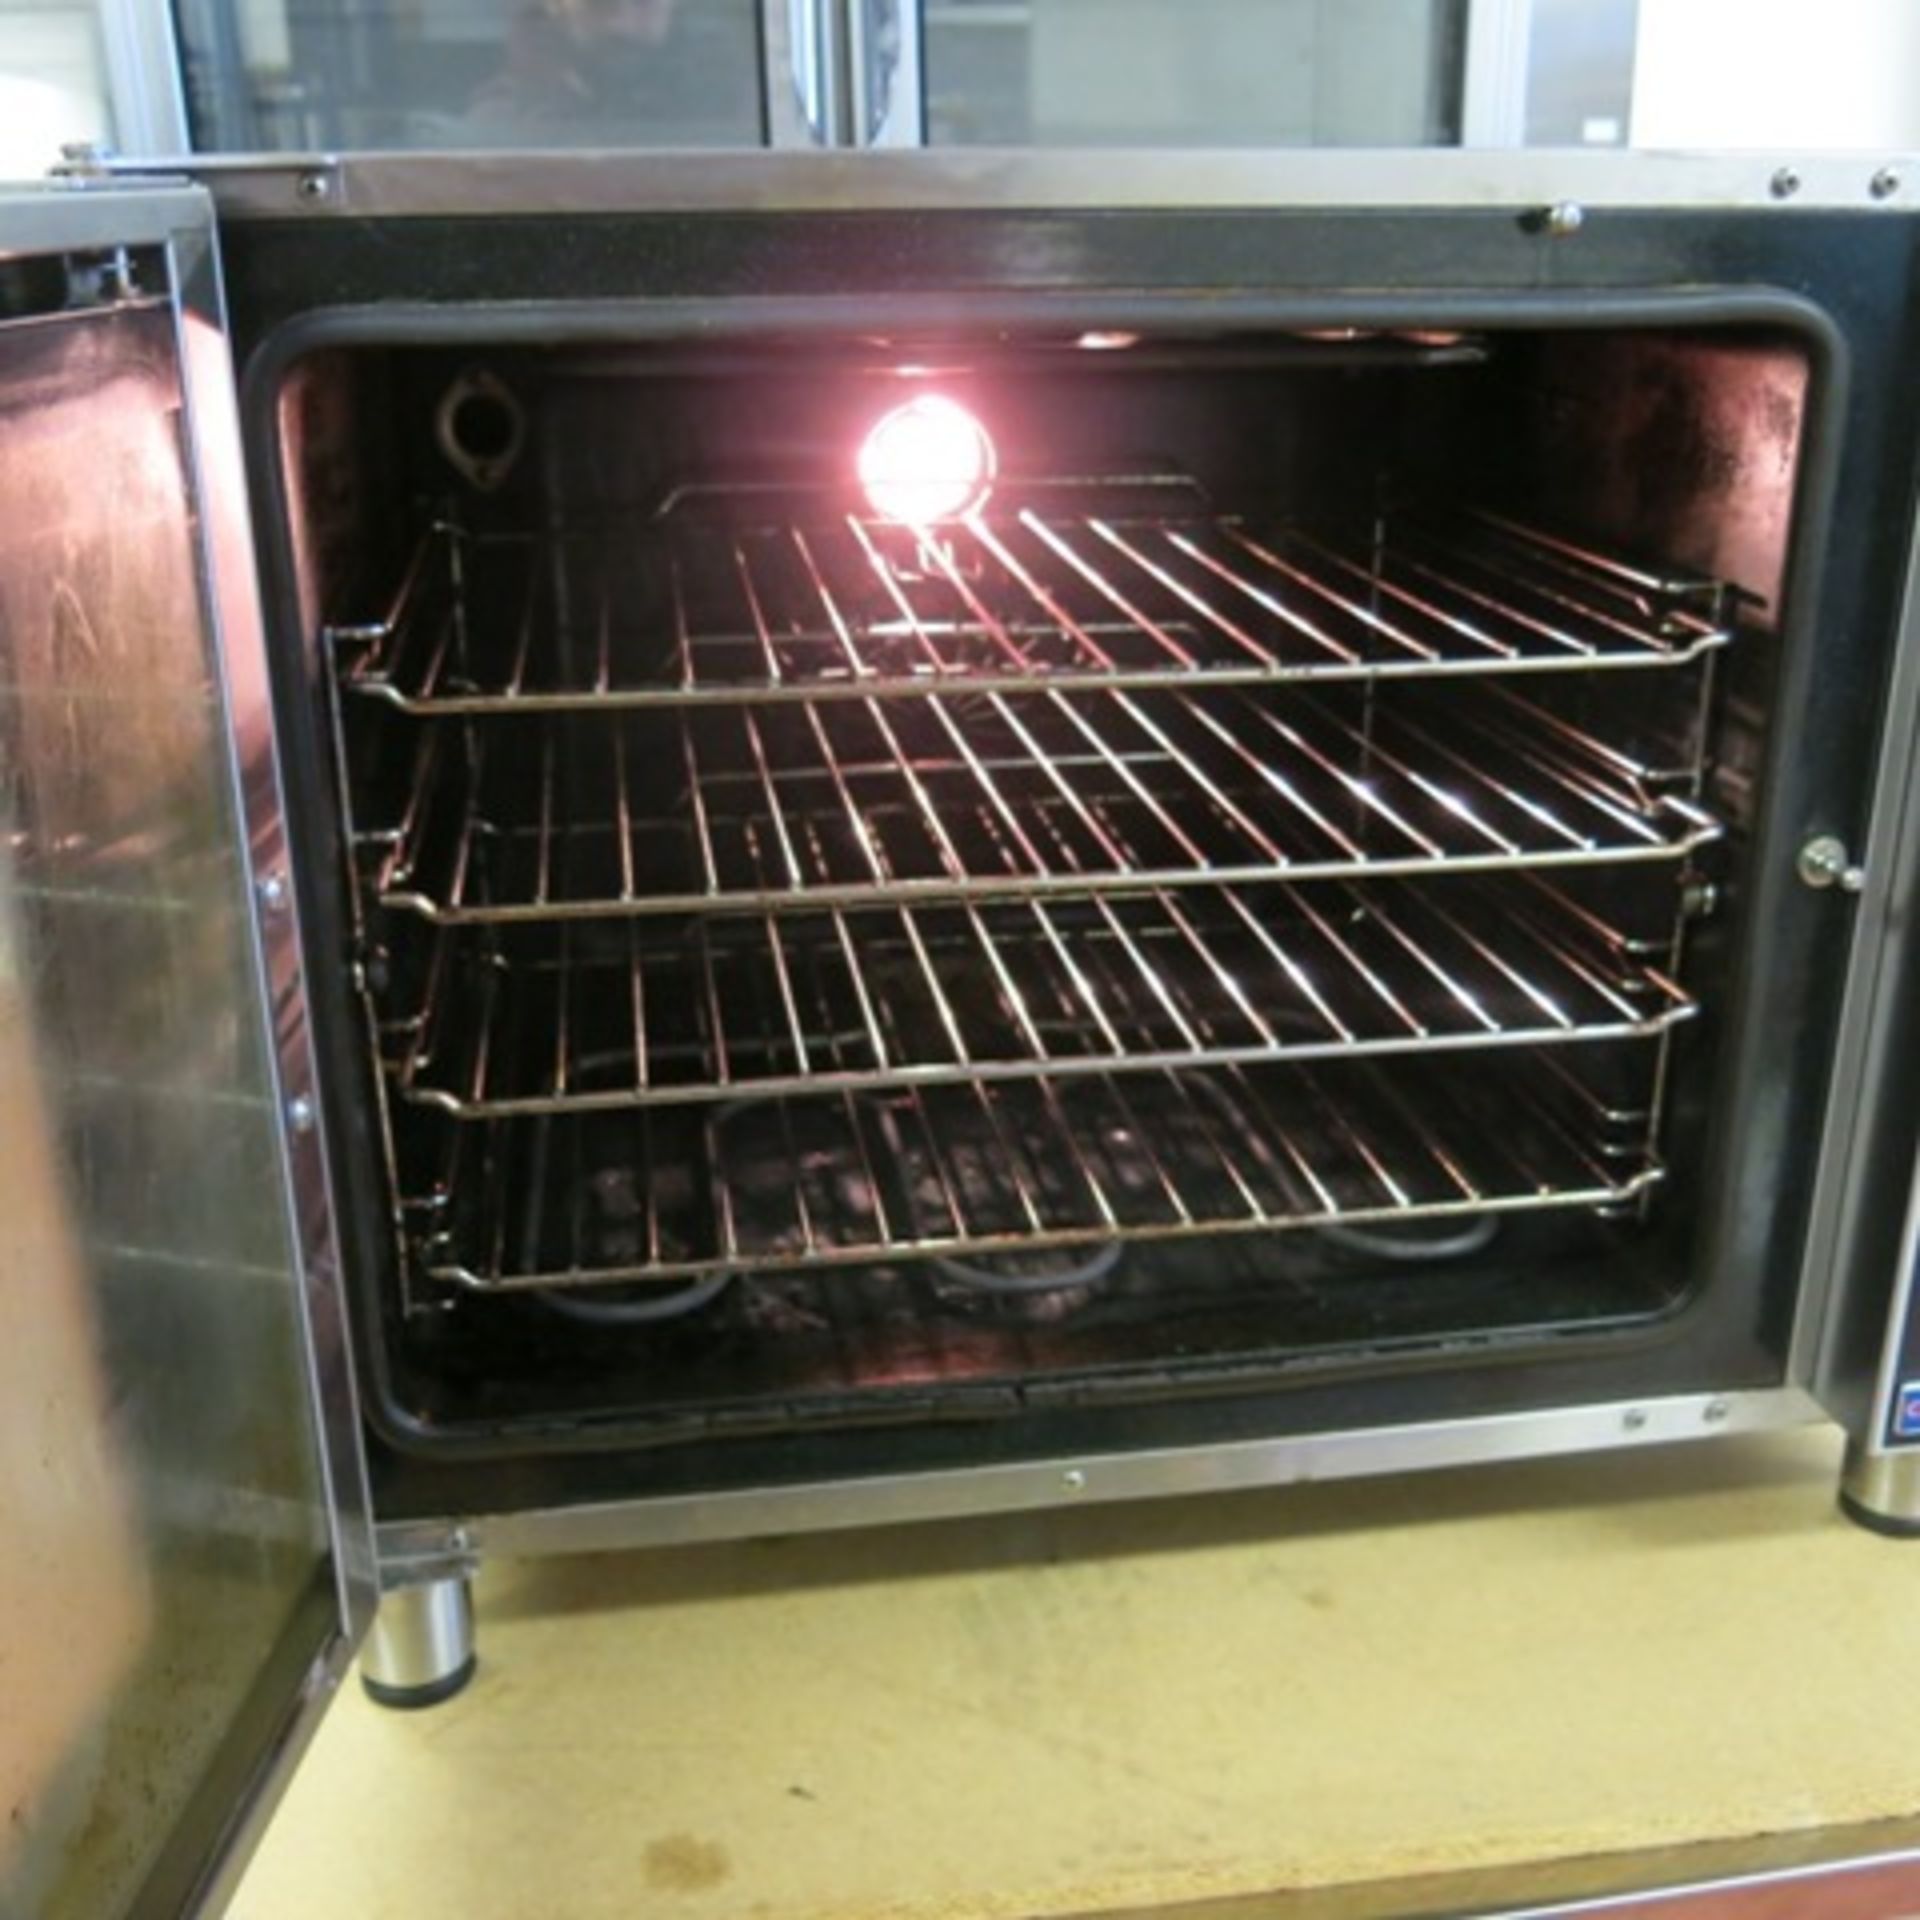 Blue Seal Turbo Digital Electric Convection Oven. Model E31D4. Size (H) 63 x (W) 81 x (D) 70cm - Image 4 of 6